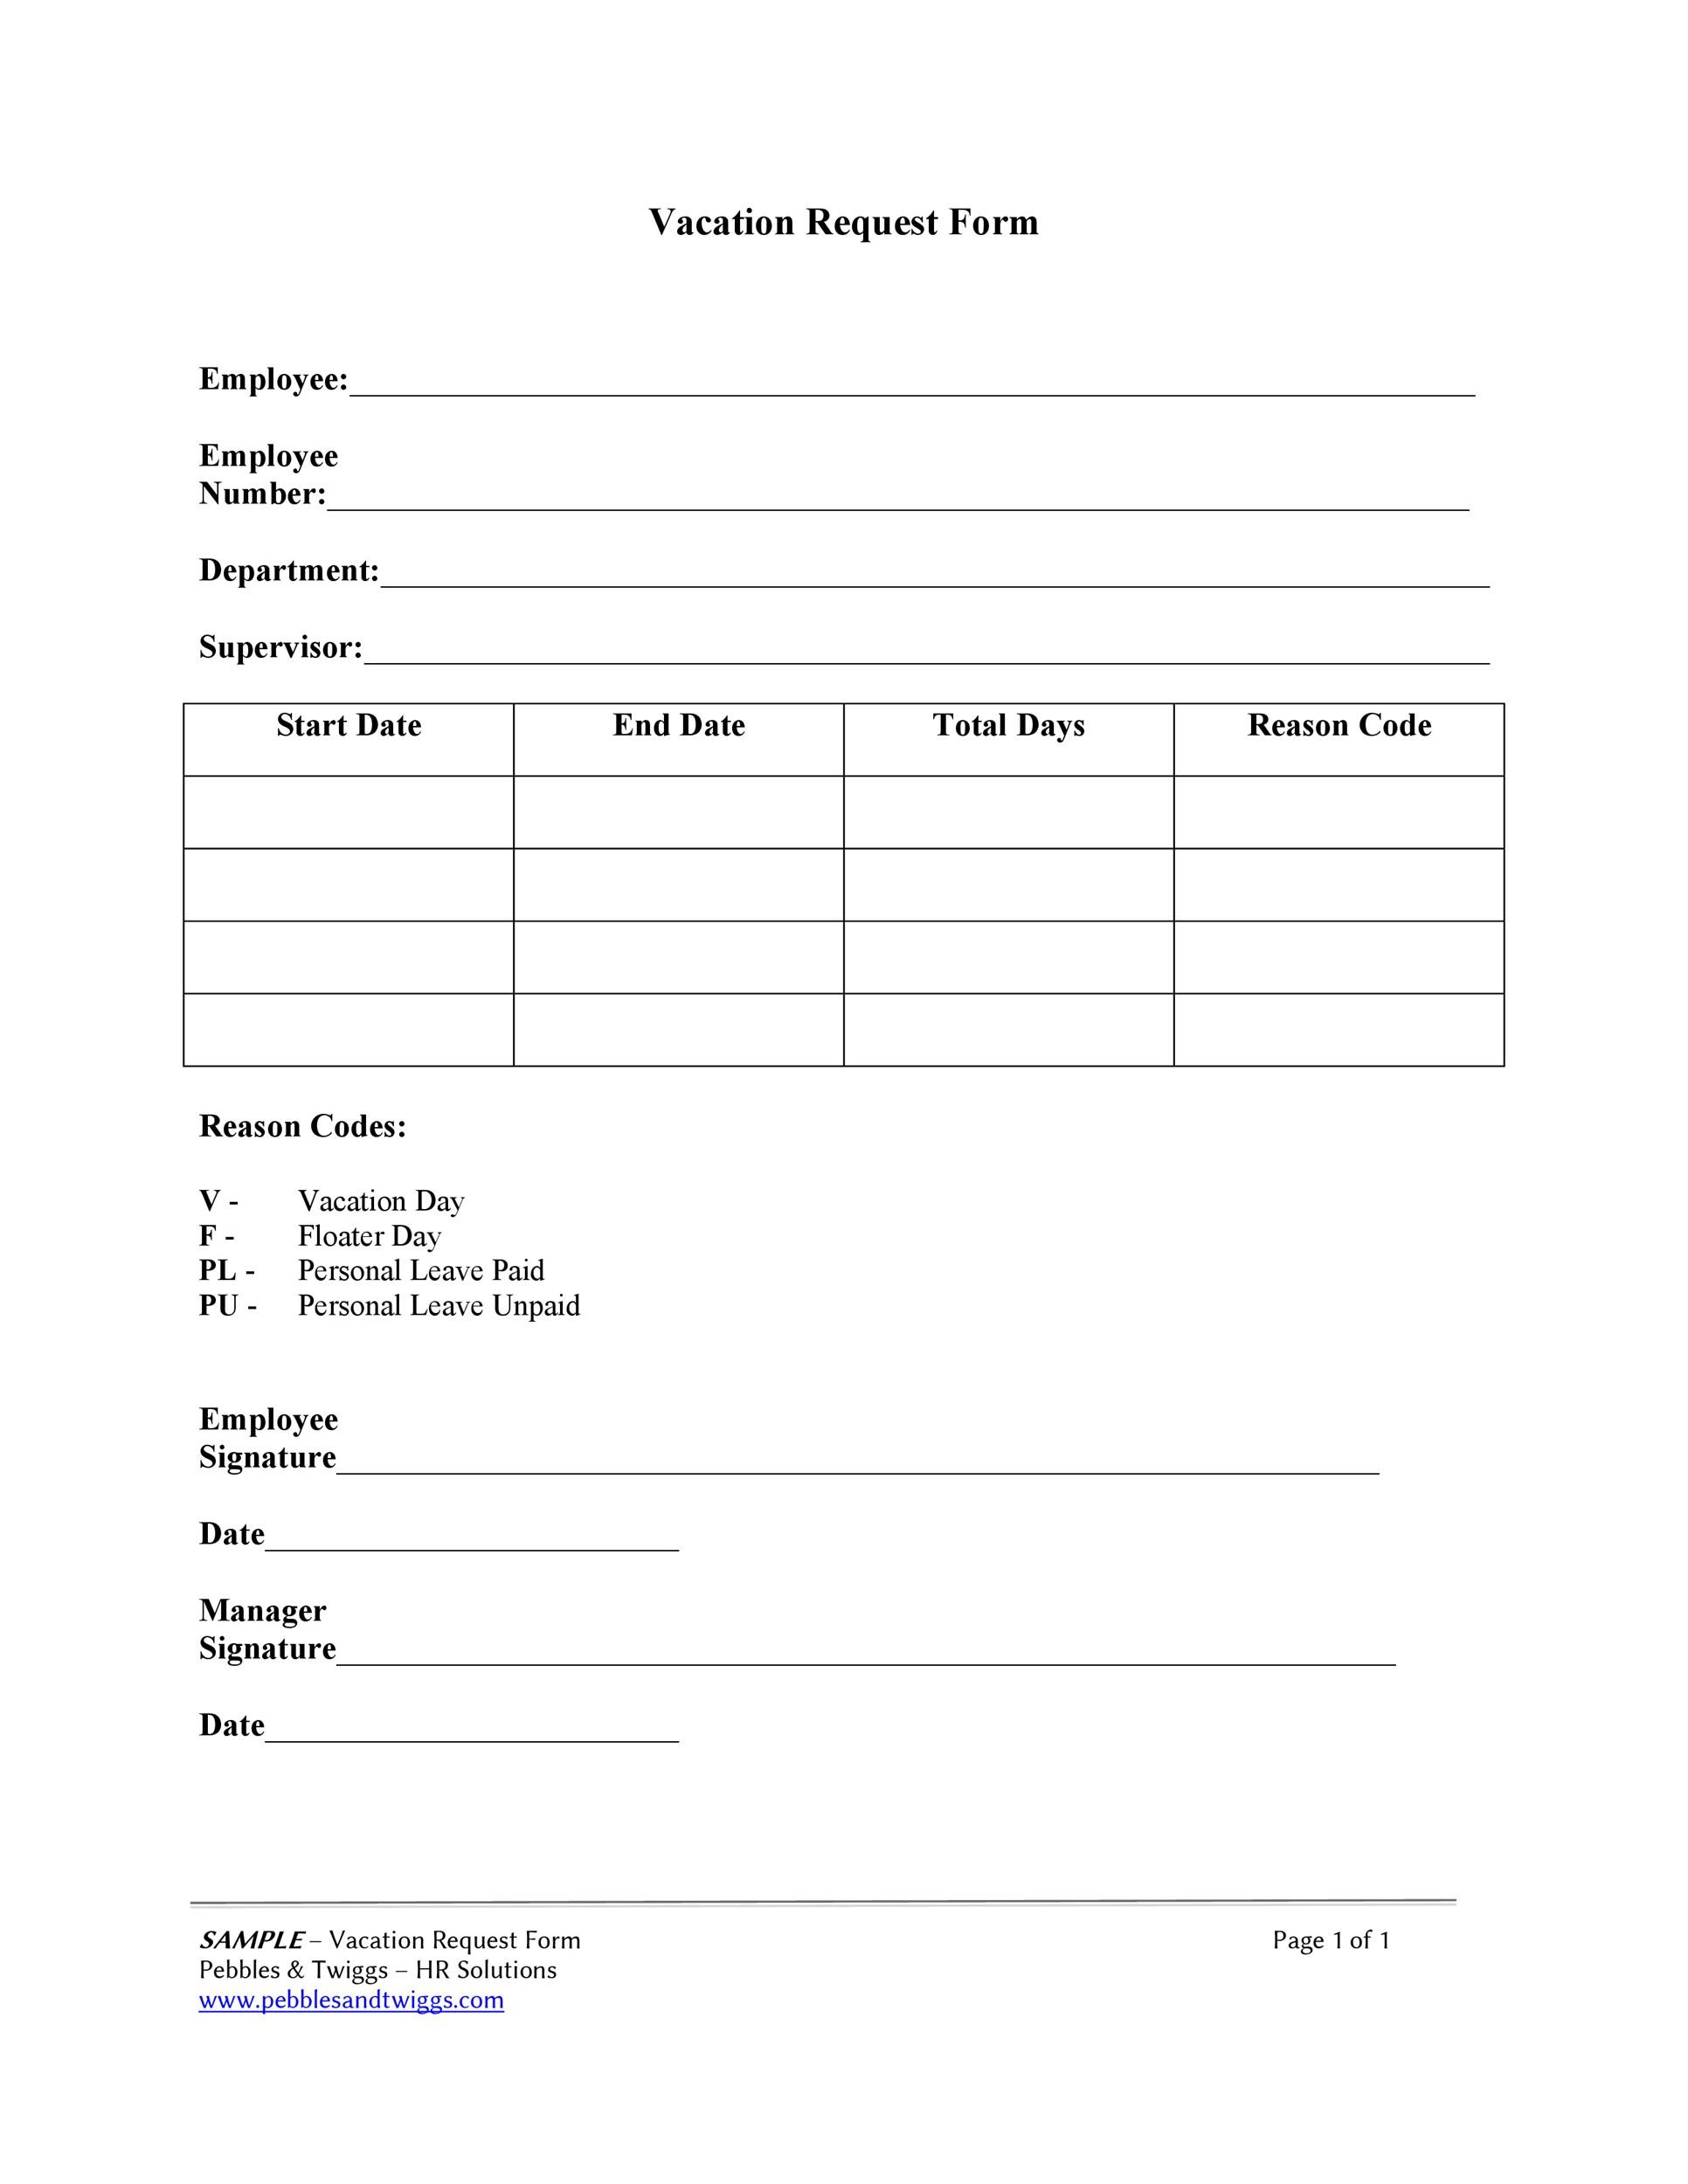 Vacation Request Forms Printable Printable Forms Free Online